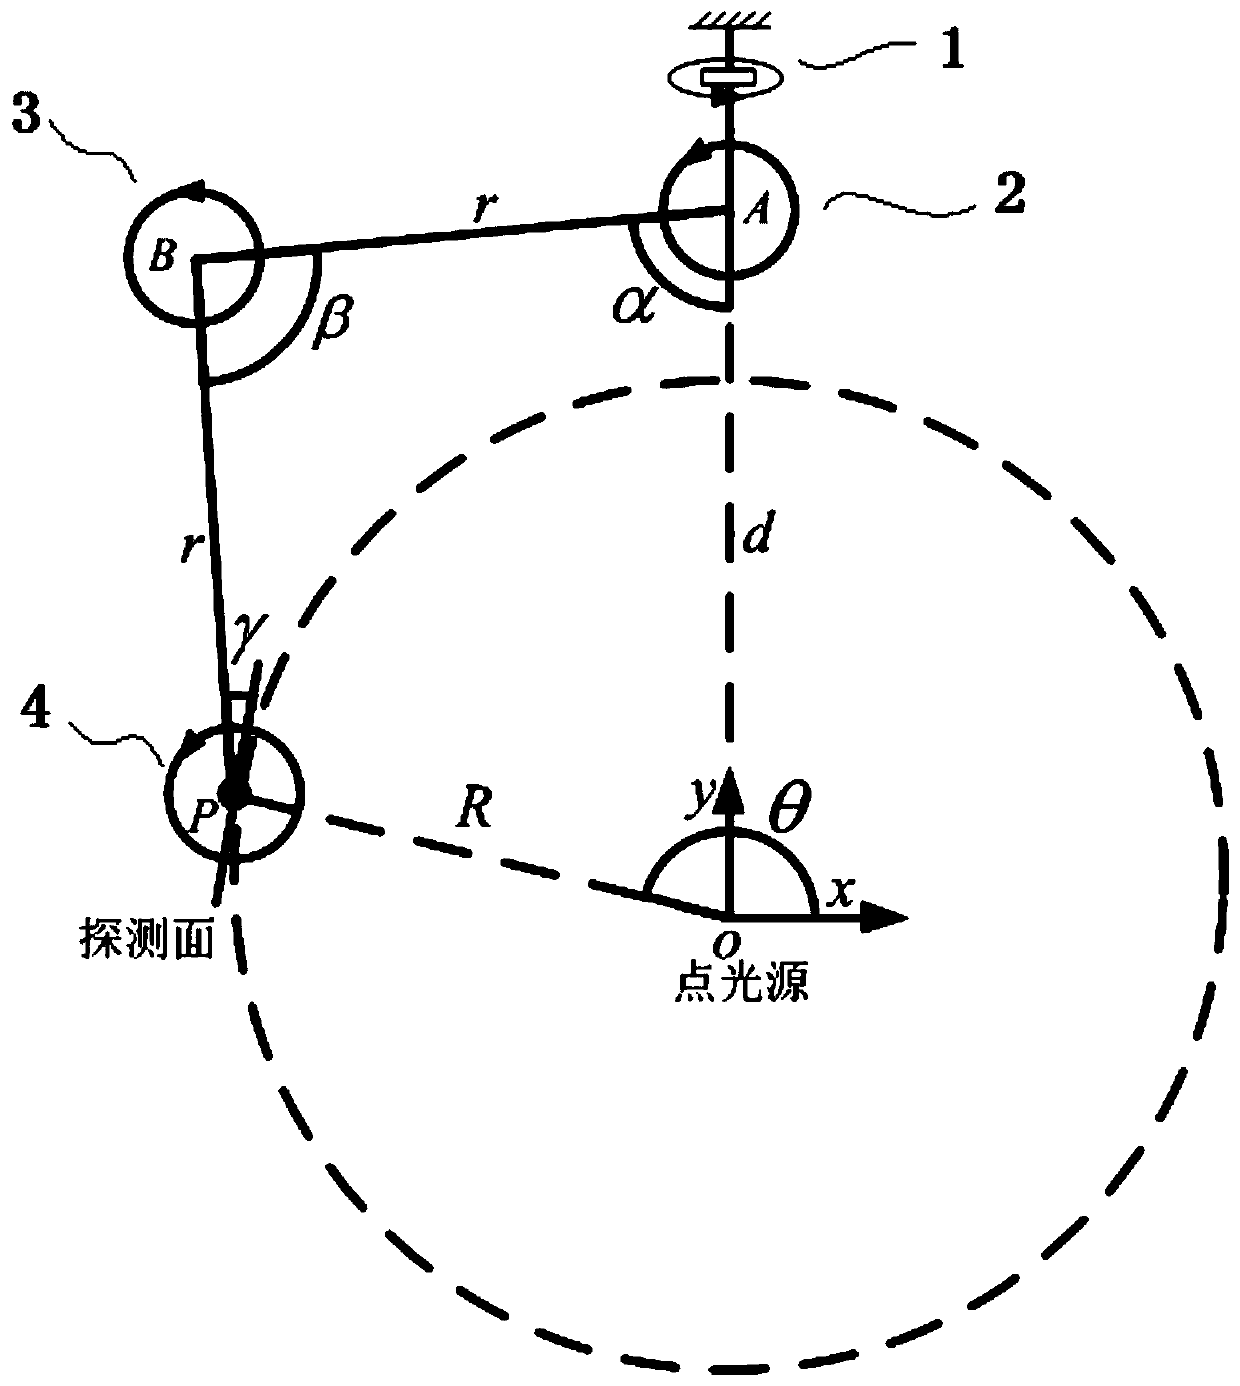 Active implementation method for spherical motion detection